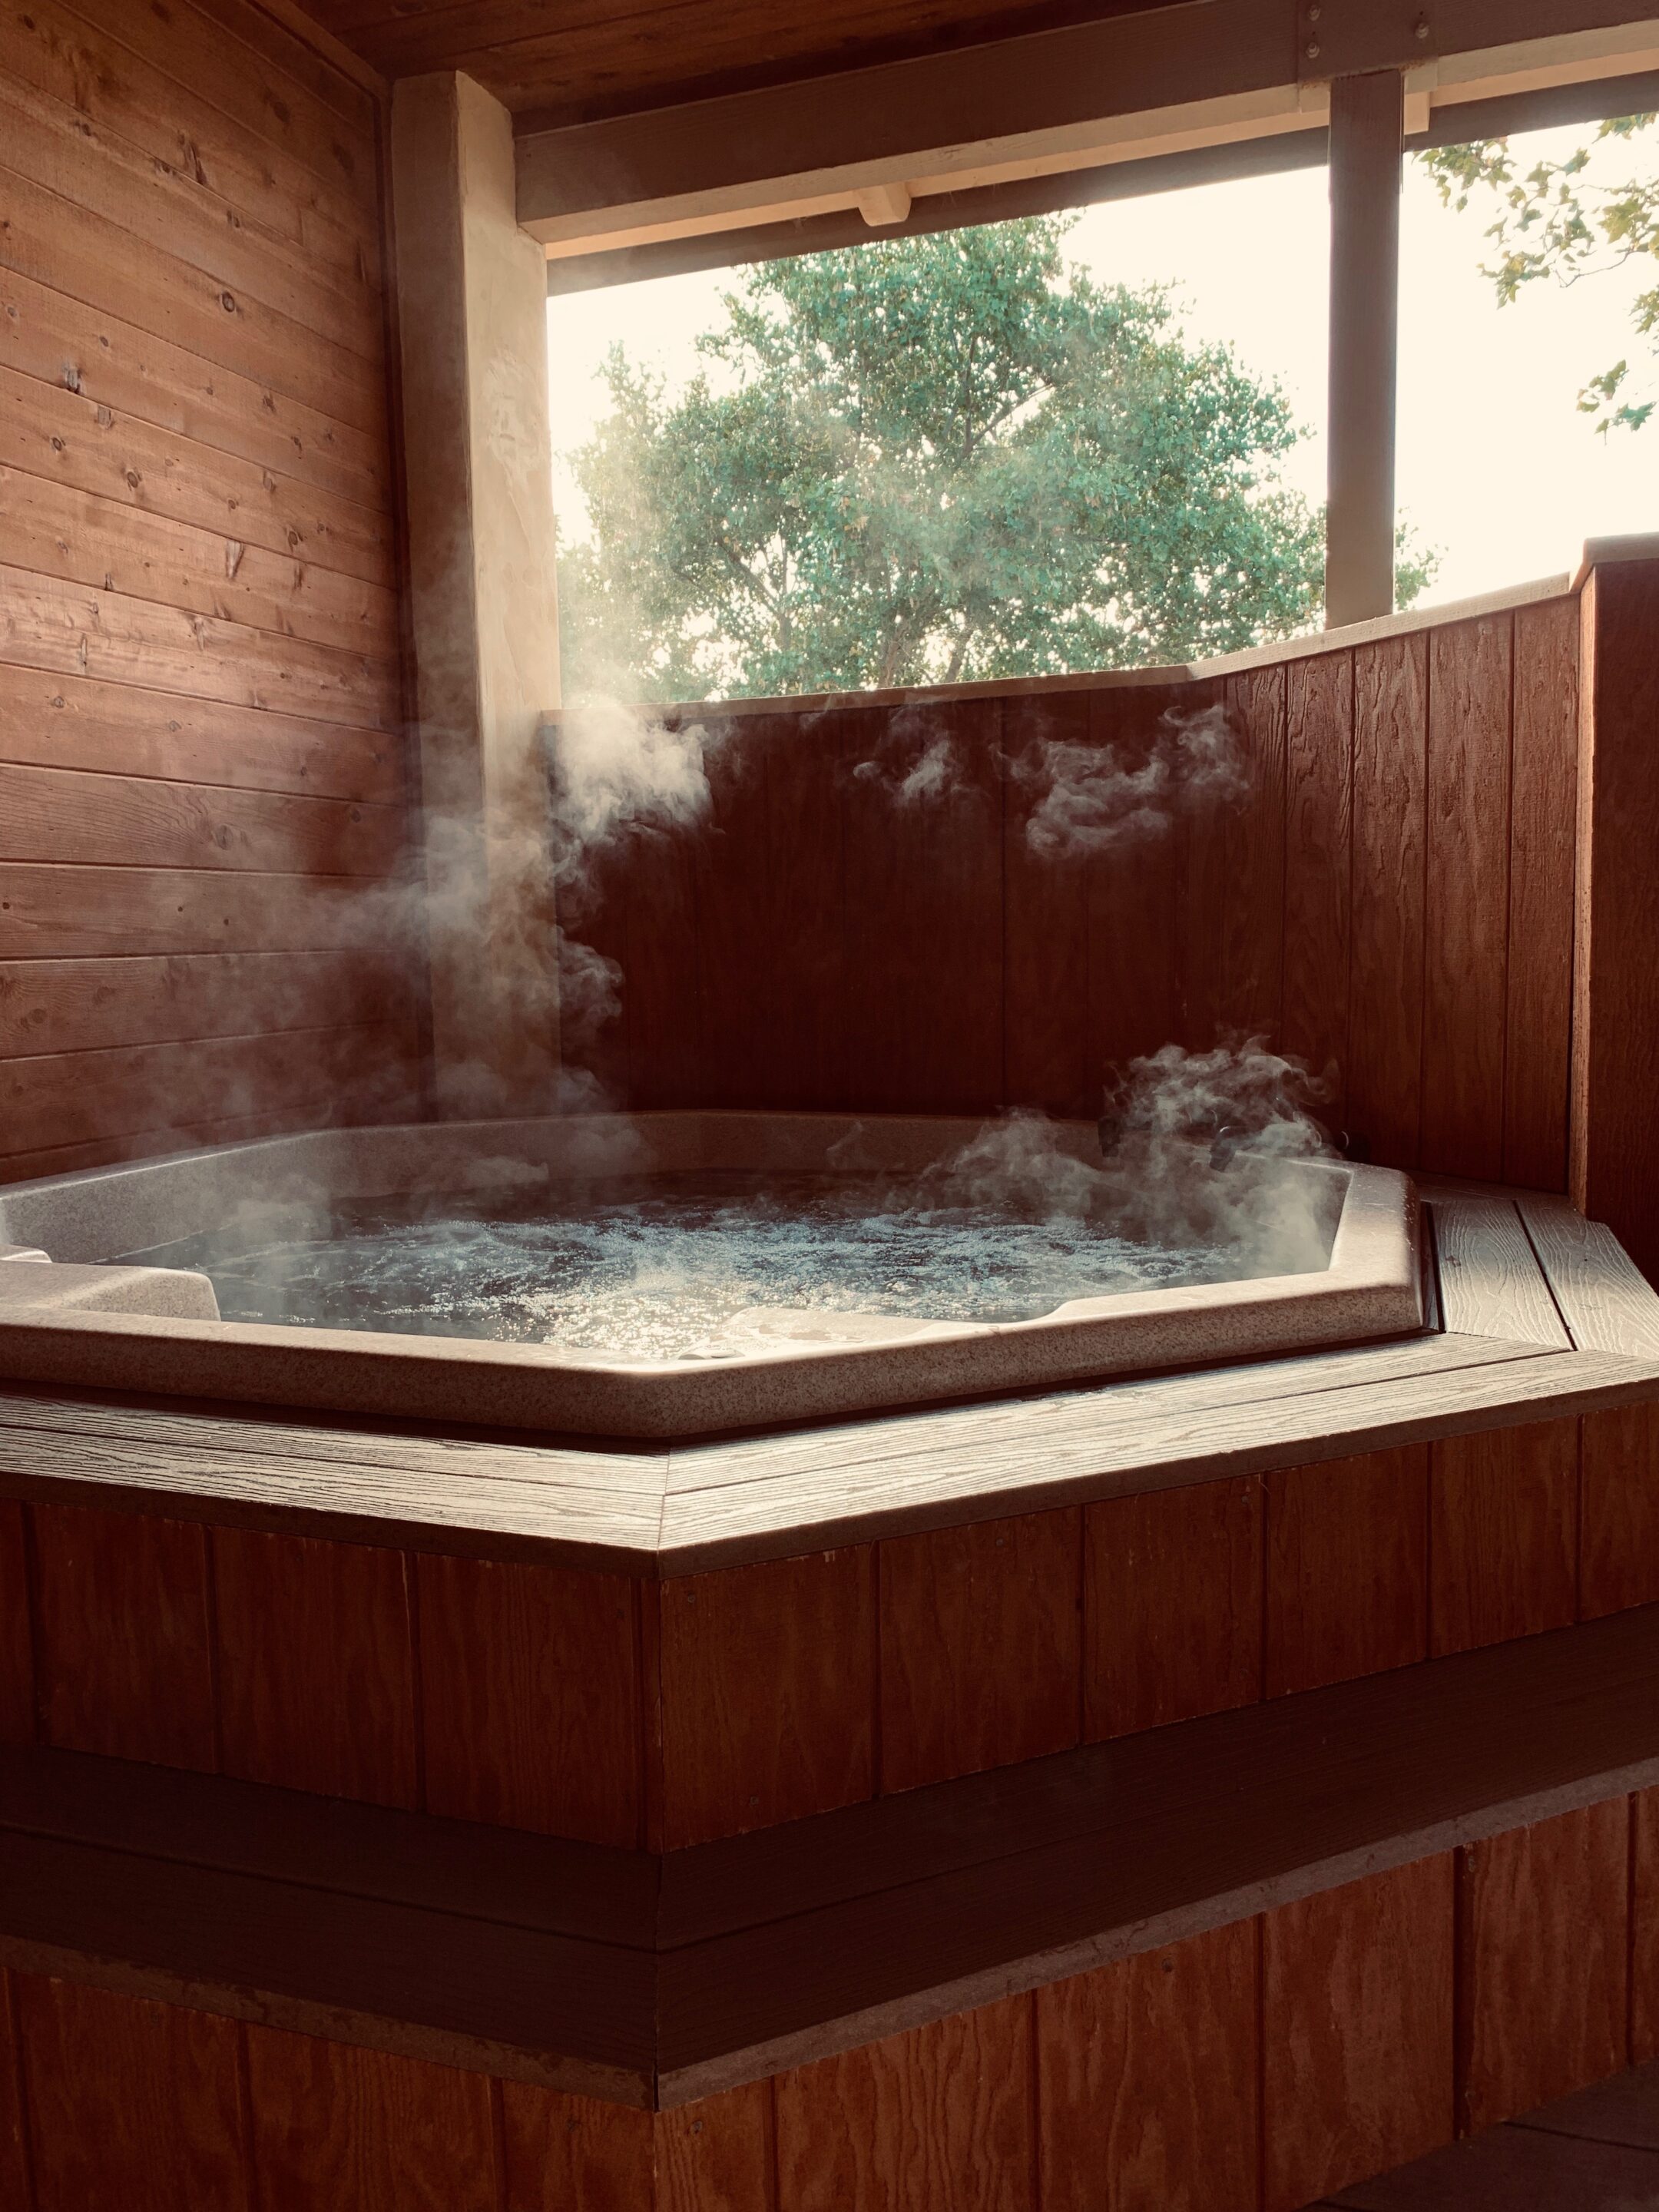 A steaming hot spring tub encased in a wooden structure with a view of leafy green trees through an open window, suggesting a serene spa experience.